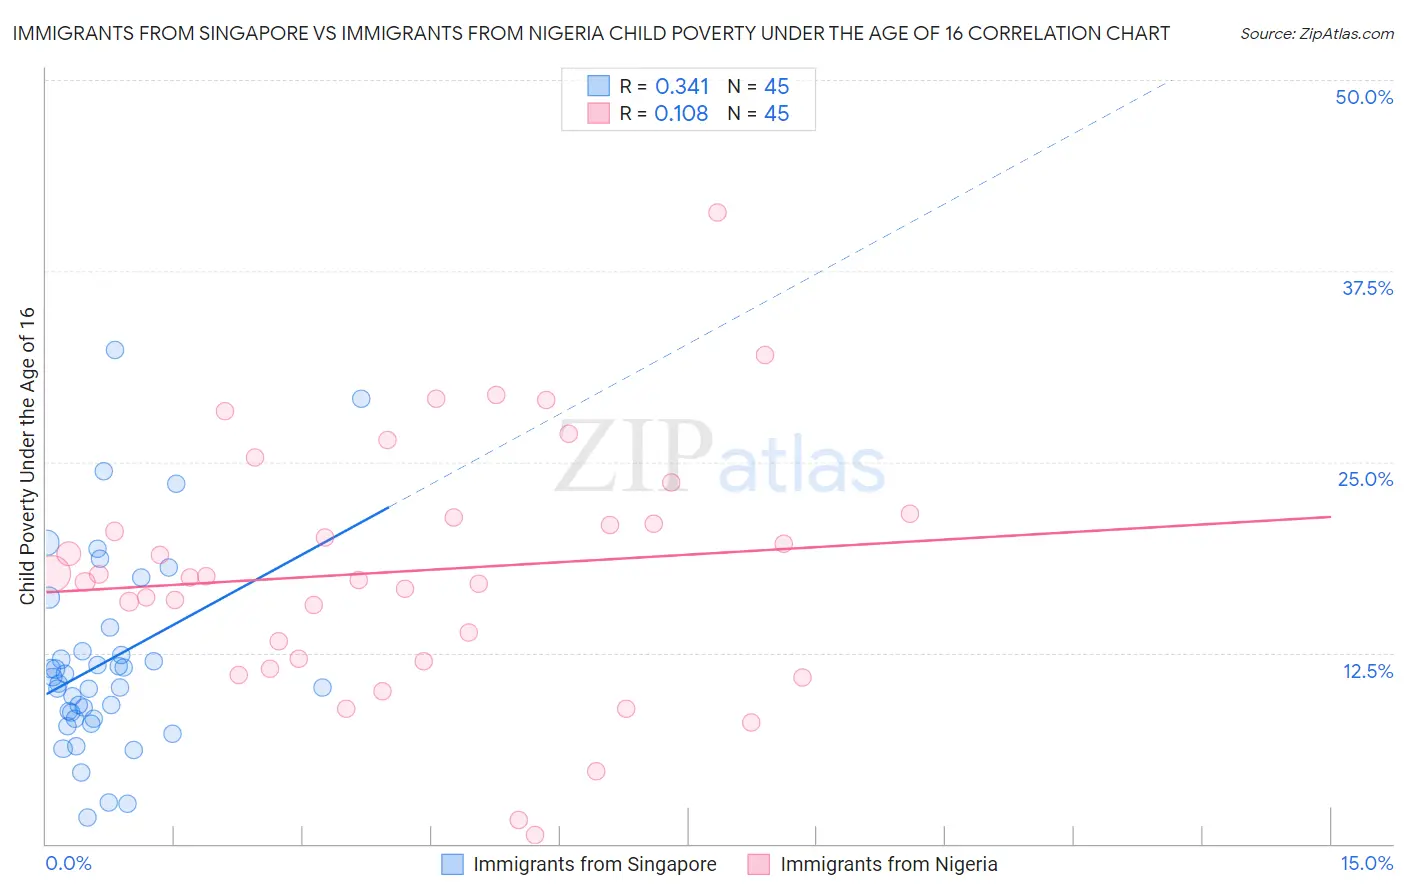 Immigrants from Singapore vs Immigrants from Nigeria Child Poverty Under the Age of 16